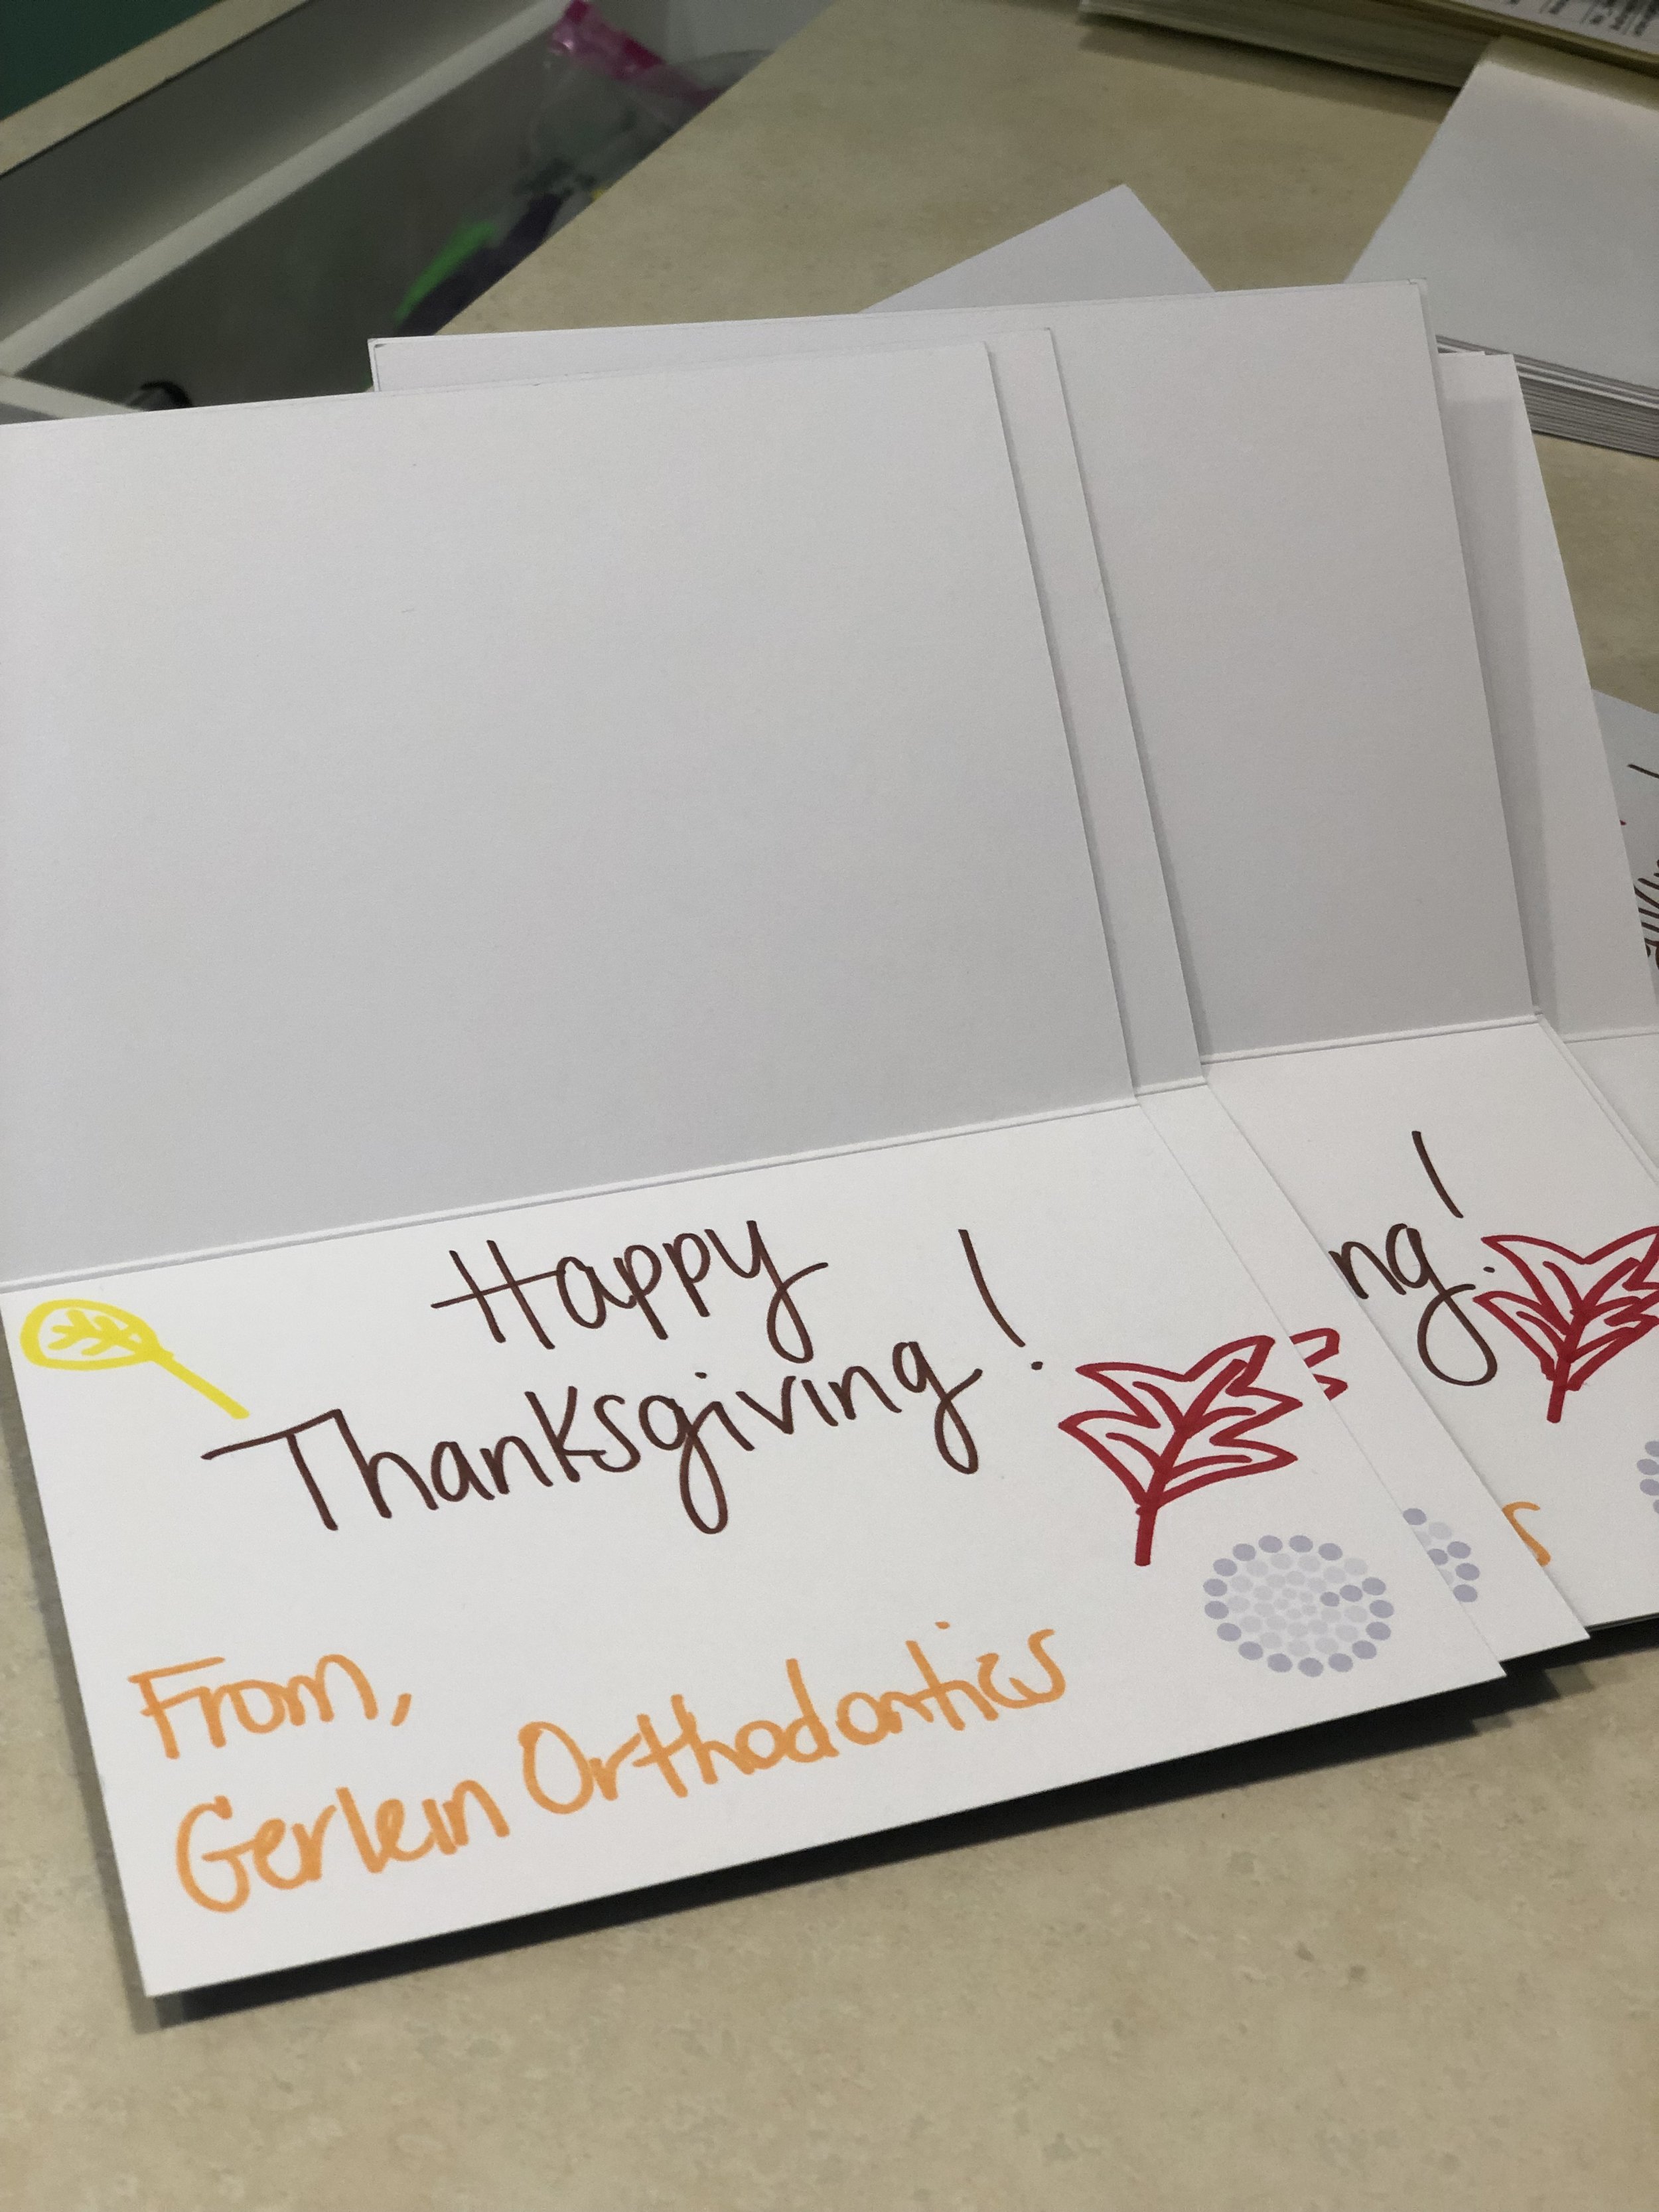 Cards included in donated thanksgiving food items. Card reads Happy Thanksgiving from Gerlein Orthodontics!